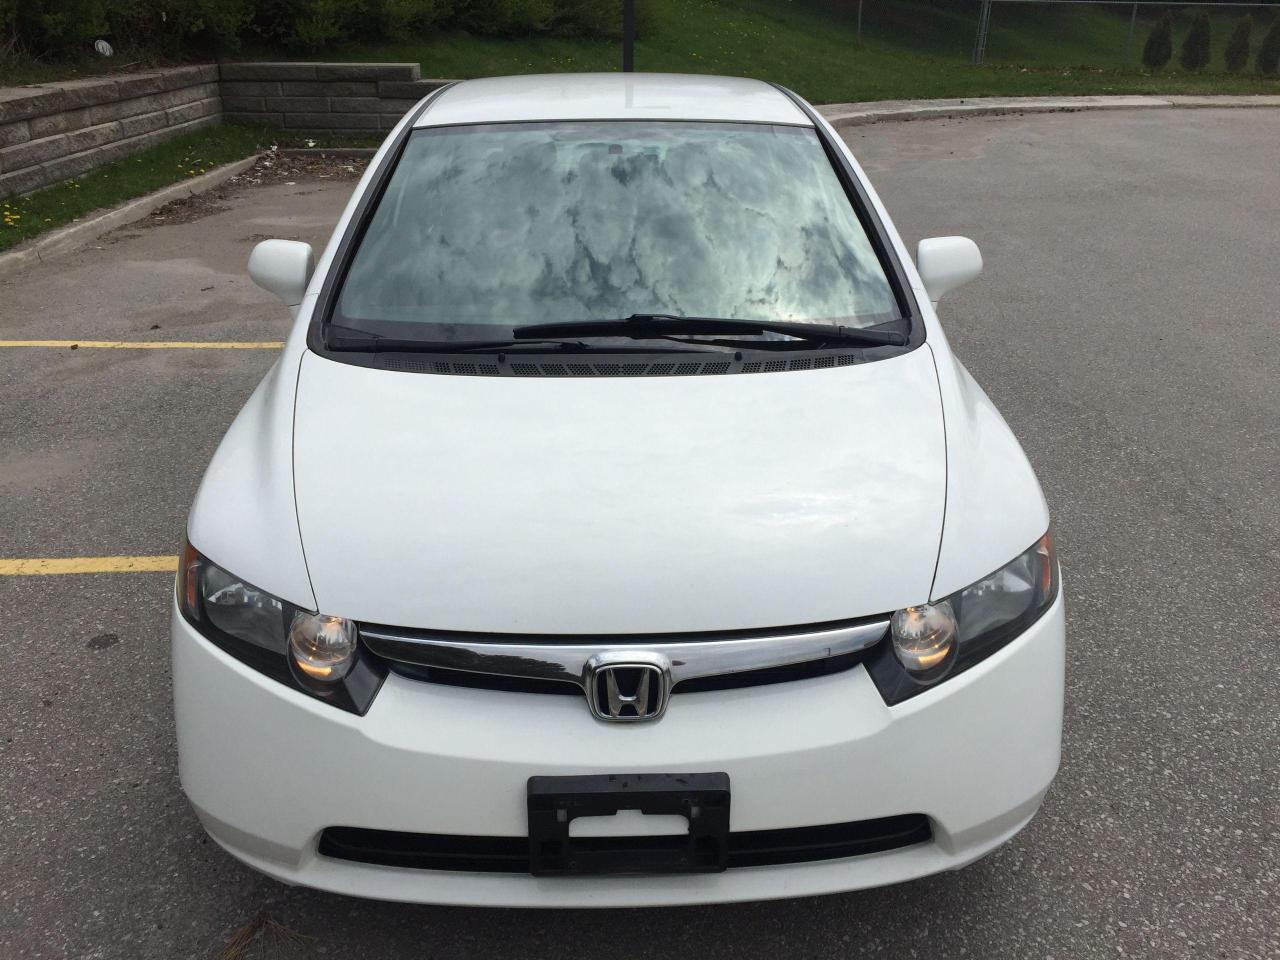 2008 Honda Civic LX-ONLY 91,541 KMS! 1 FEMALE OWNER-NO CLAIMS! - Photo #6